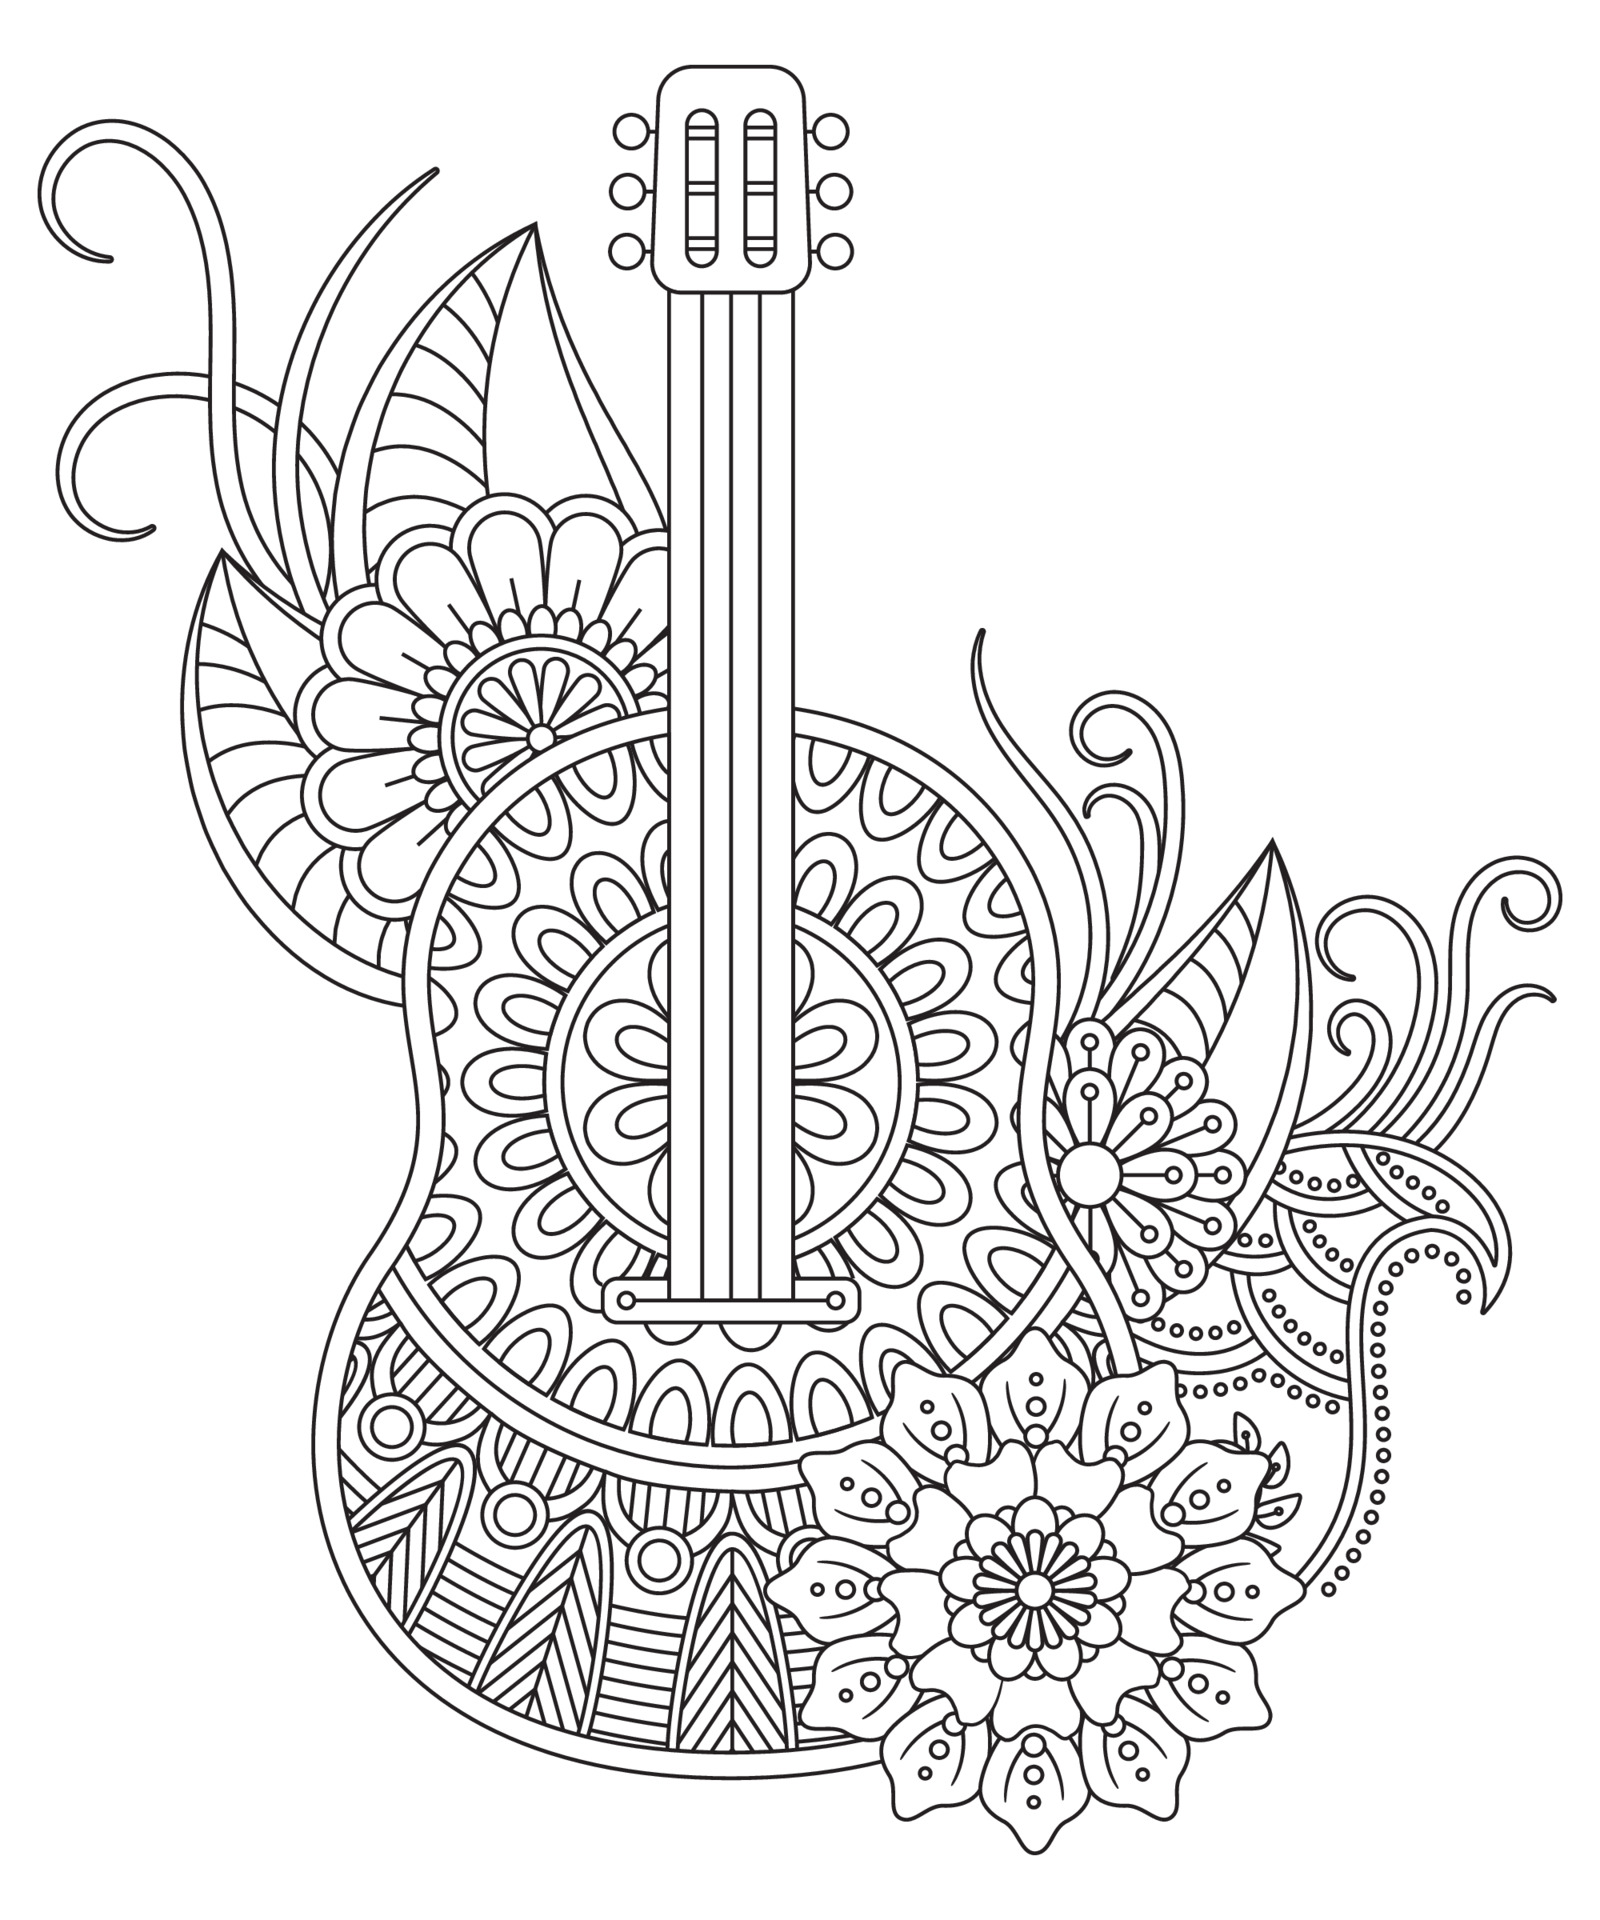 Guitar Coloring Page For Adult Antis Tress And Relax Meditation 3600298 Vector Art At Vecteezy